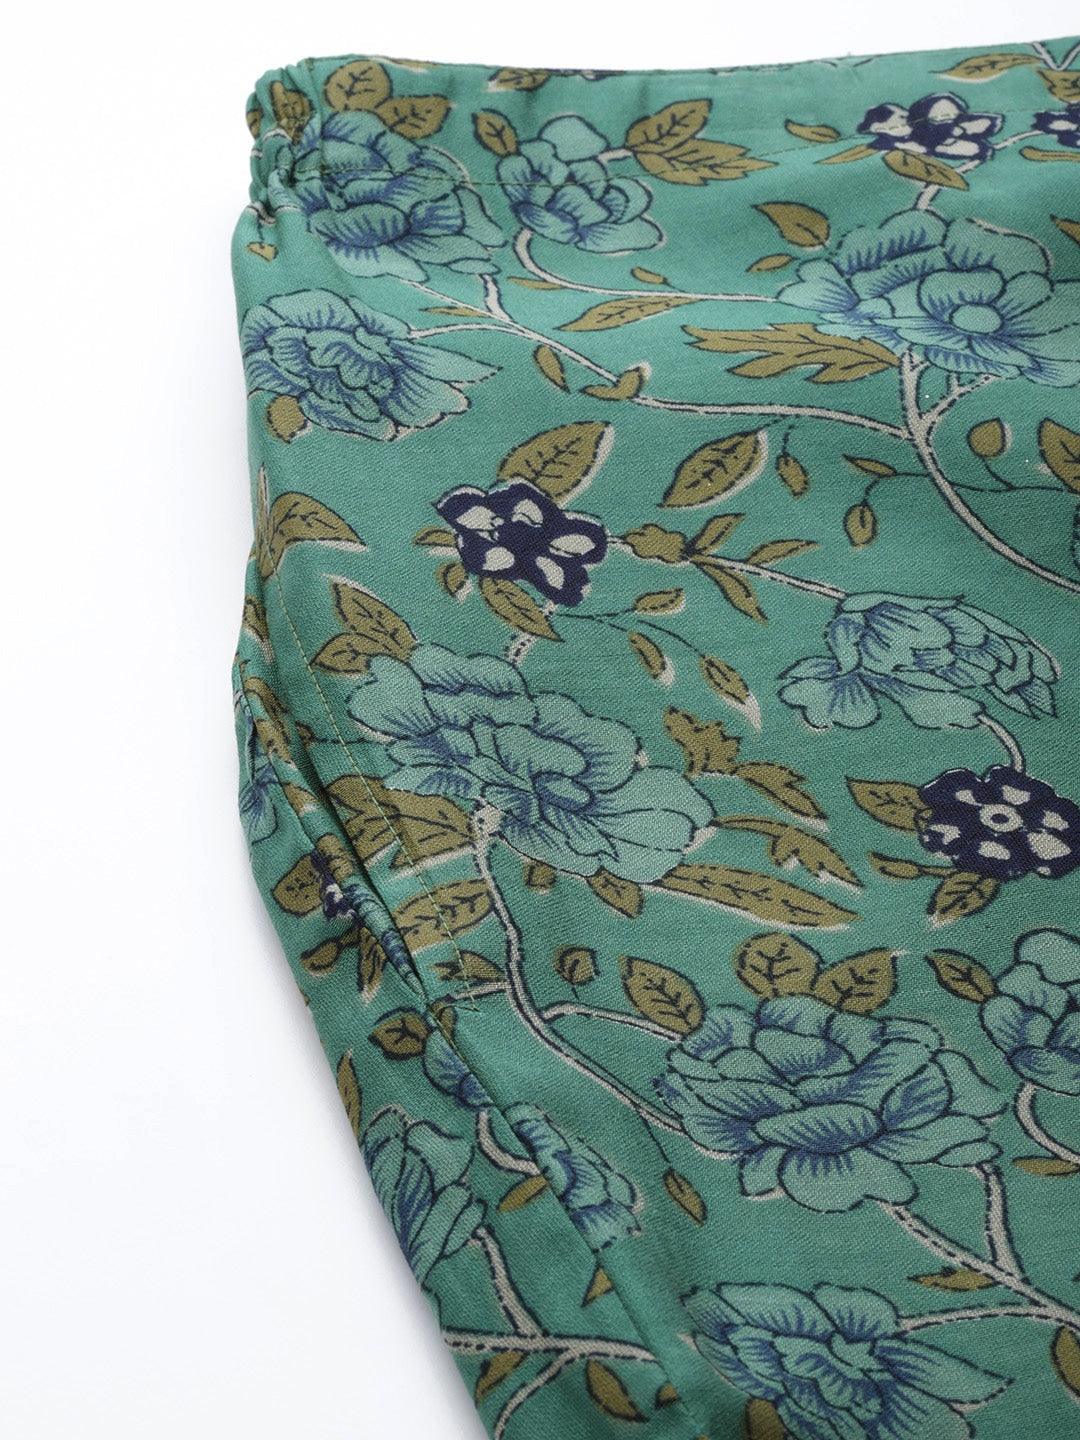 Green Printed Cotton Trousers